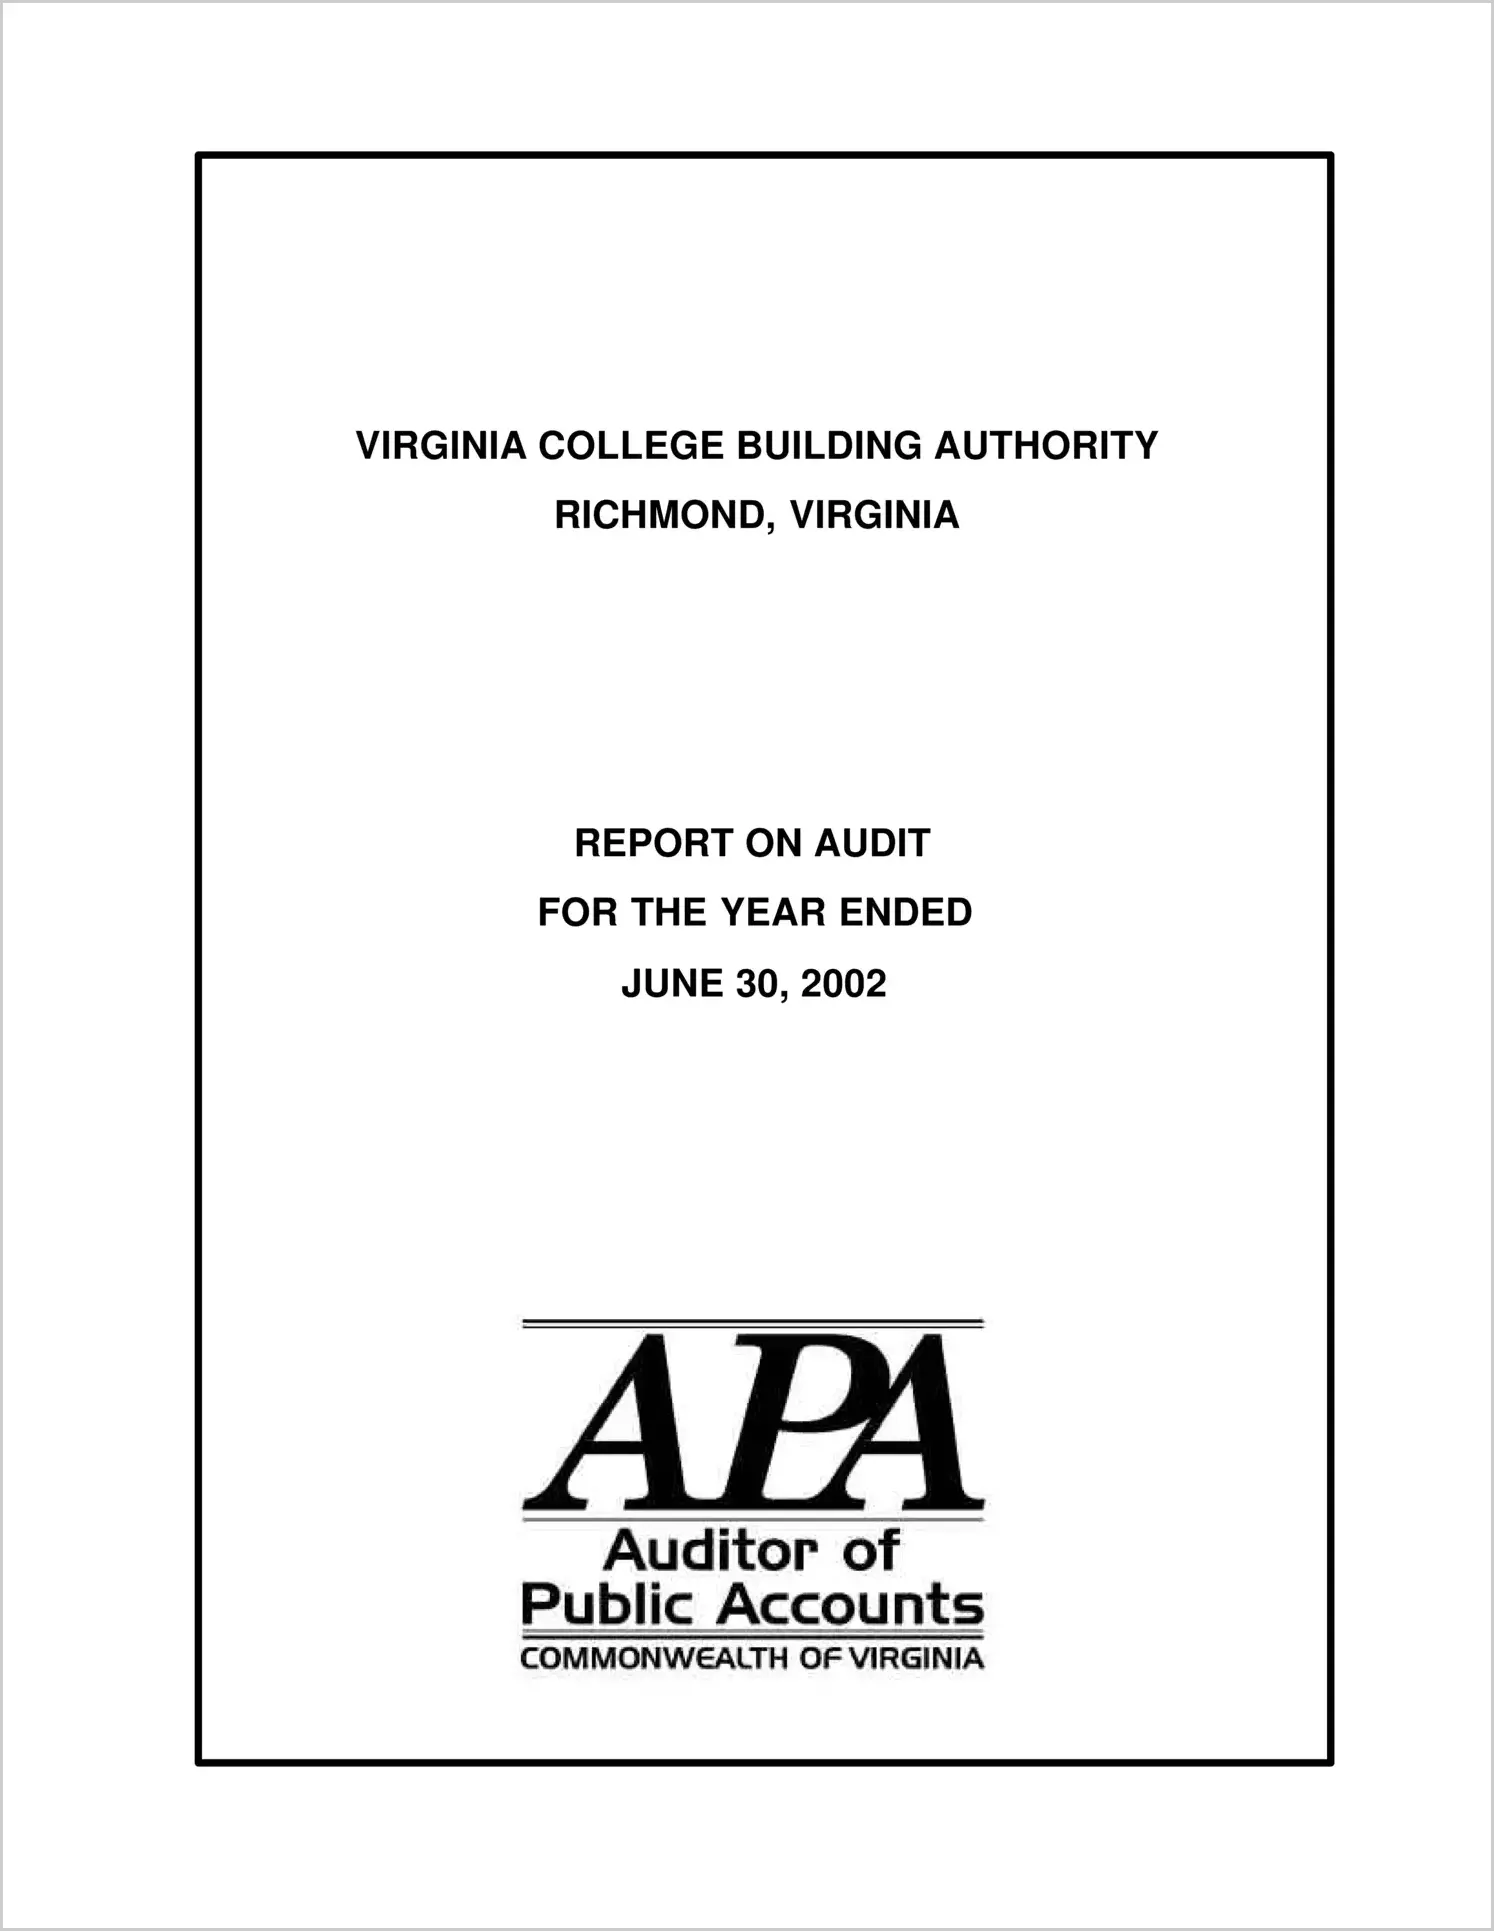 Virginia College Building Authority for the year ended June 30, 2002